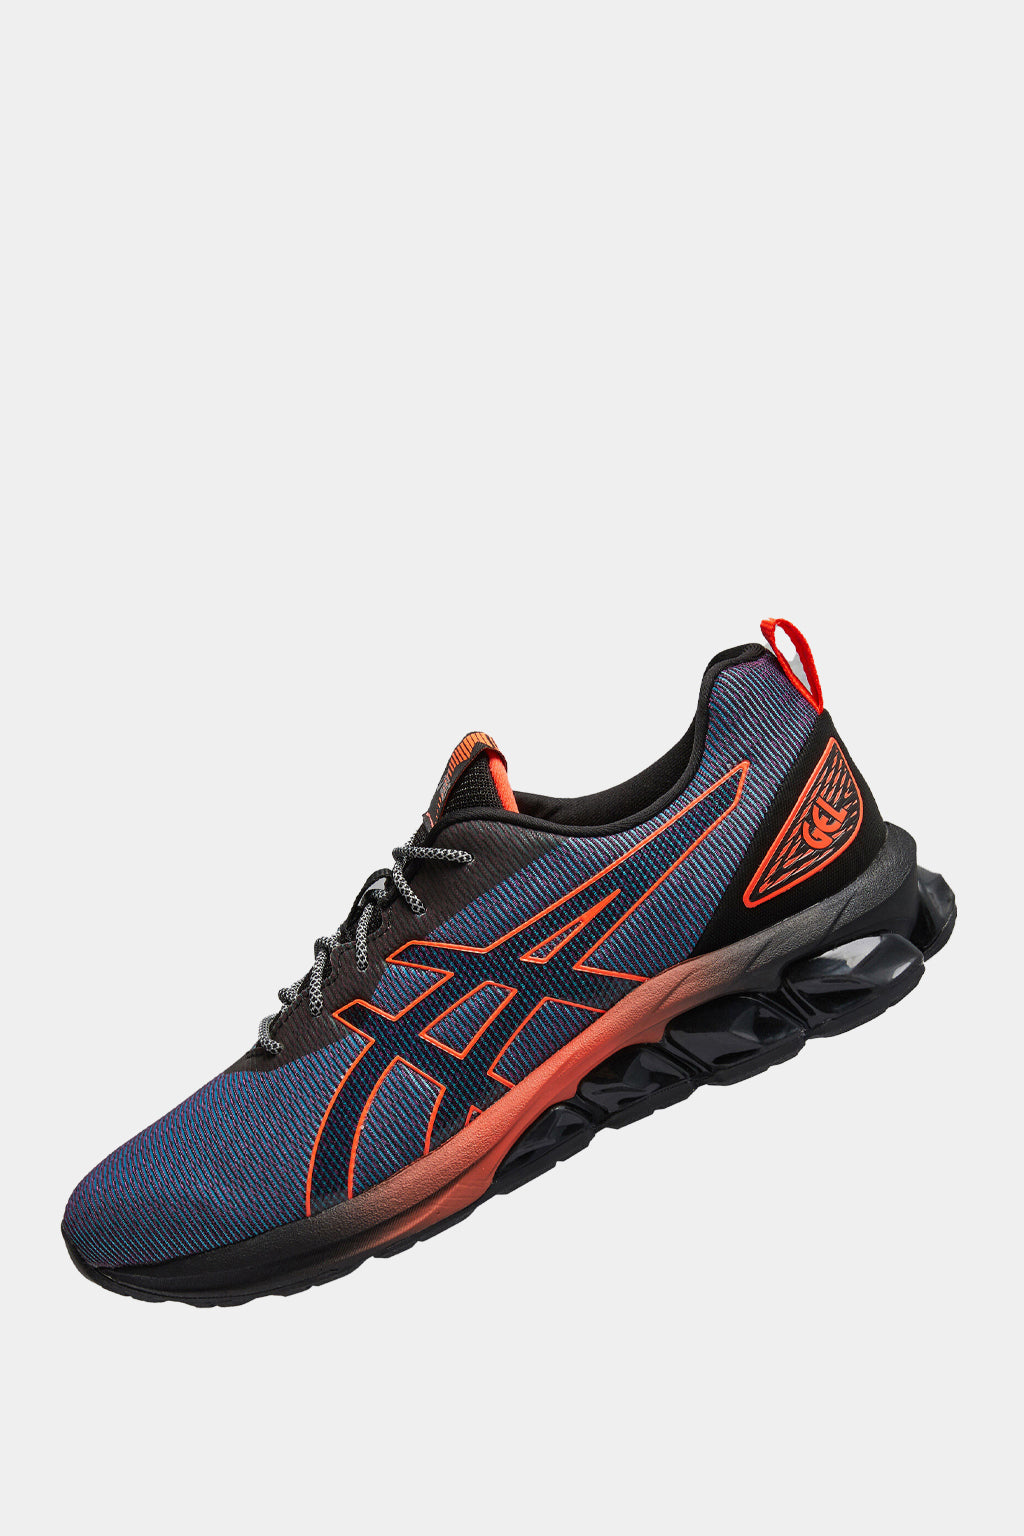 Asics - Gel Quantum 180 Vii Holiday Sportstyle Shoes